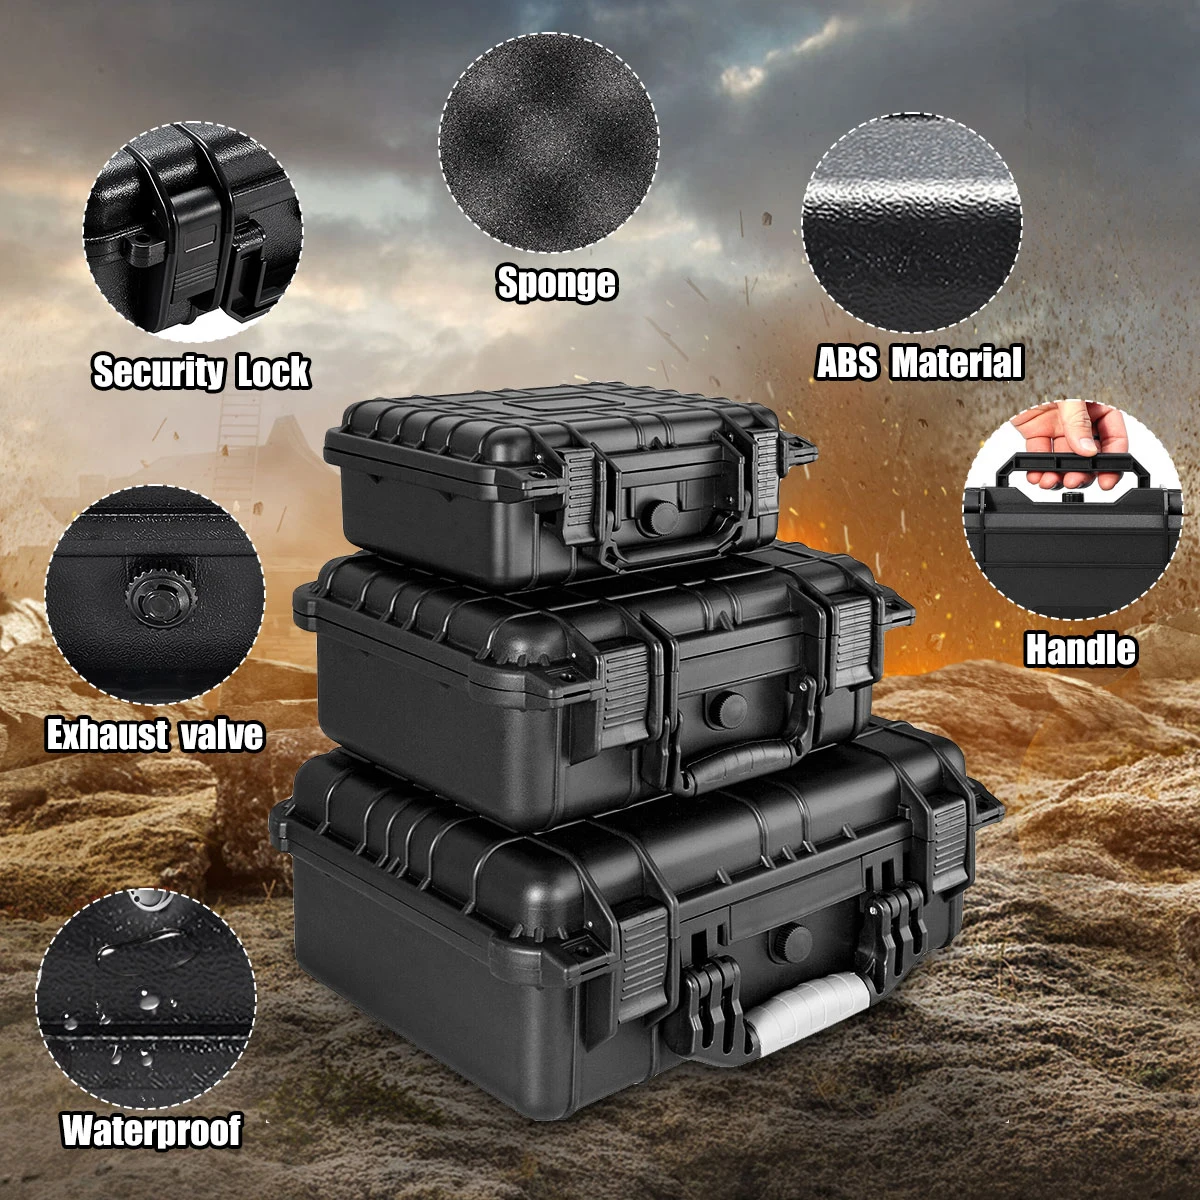 ABS Portable Safety Equipment Case Waterproof Hardware Carry Tool Case Bag Storage Box Camera Photography with Sponge for Tools